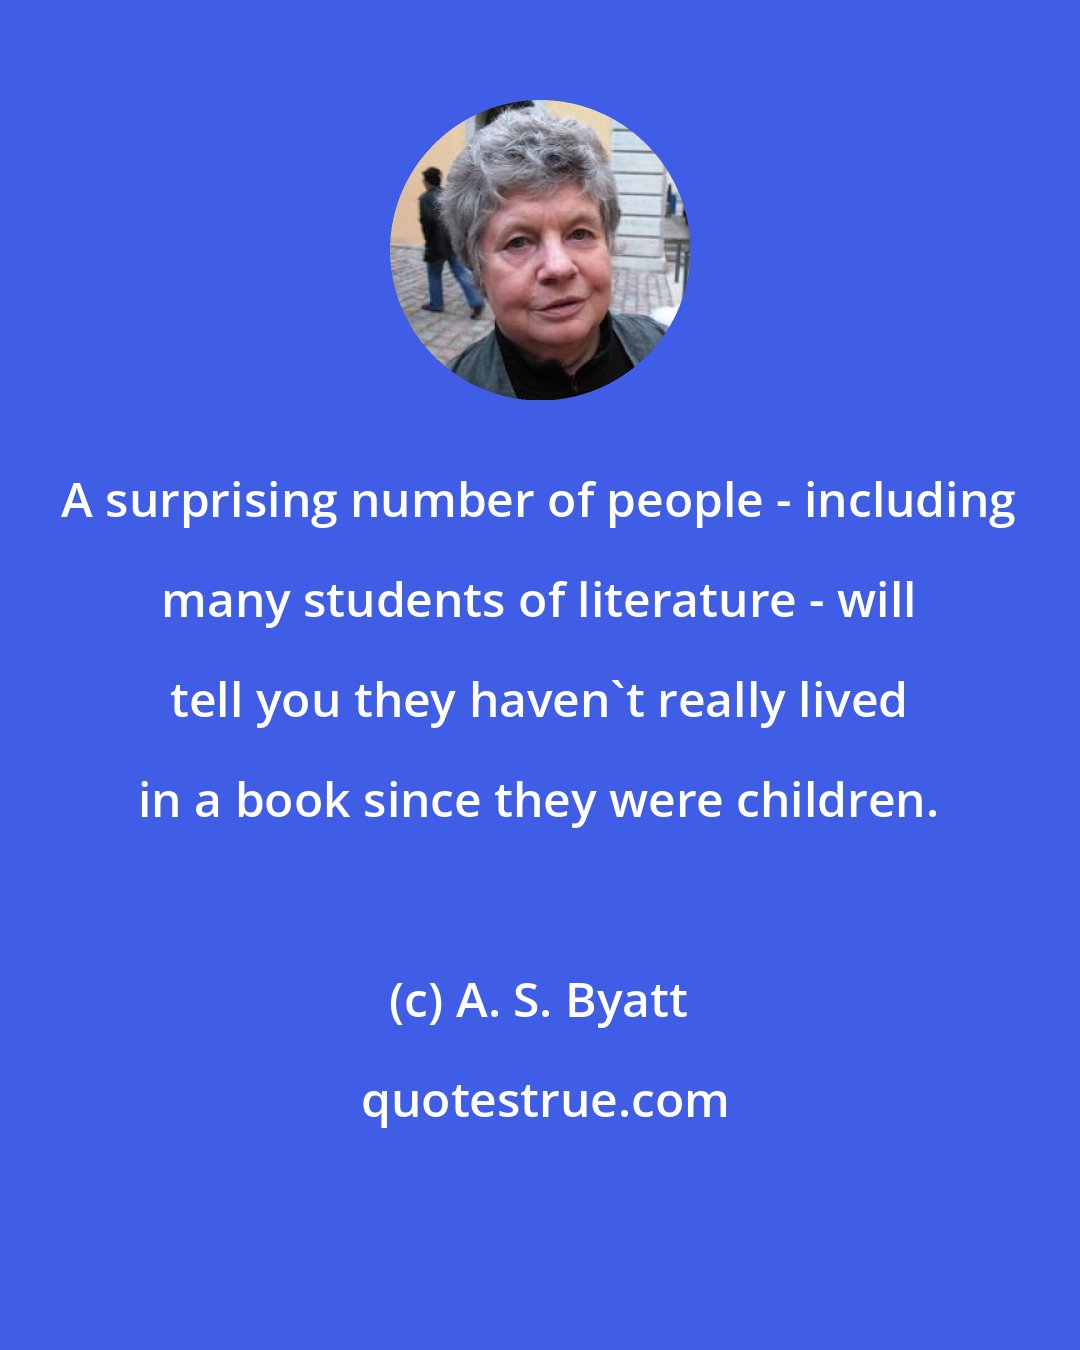 A. S. Byatt: A surprising number of people - including many students of literature - will tell you they haven't really lived in a book since they were children.